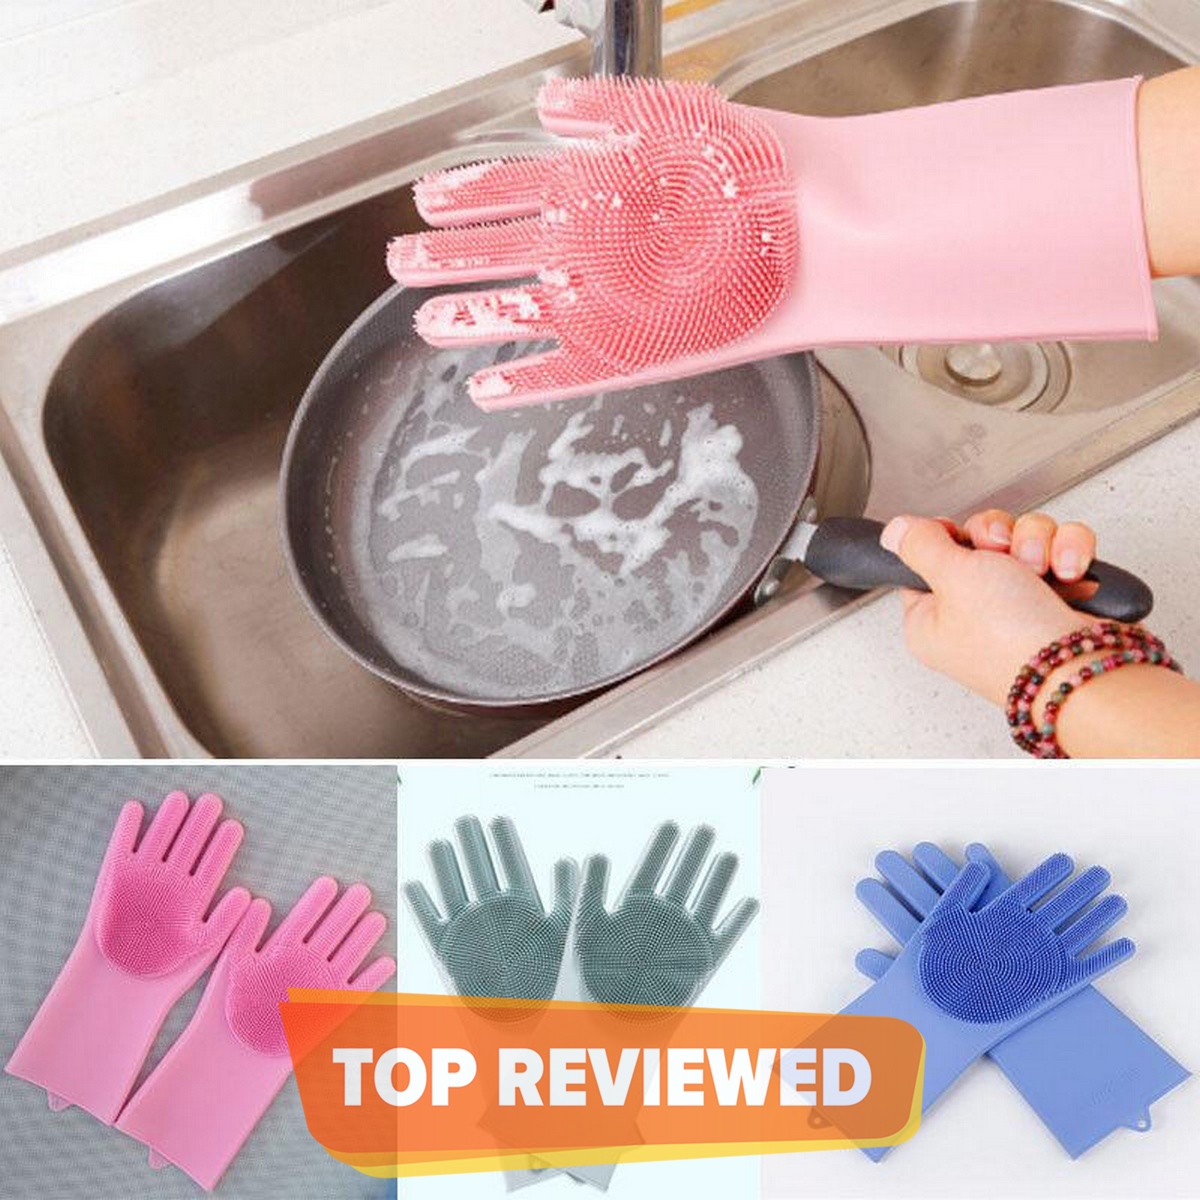 Reusable Magic Dish Washing Gloves With Scrubber, Silicone Cleaning, Scrub Gloves For Wash Dish, Car Washing, Kitchen, Bathroom Multipurpose Usage